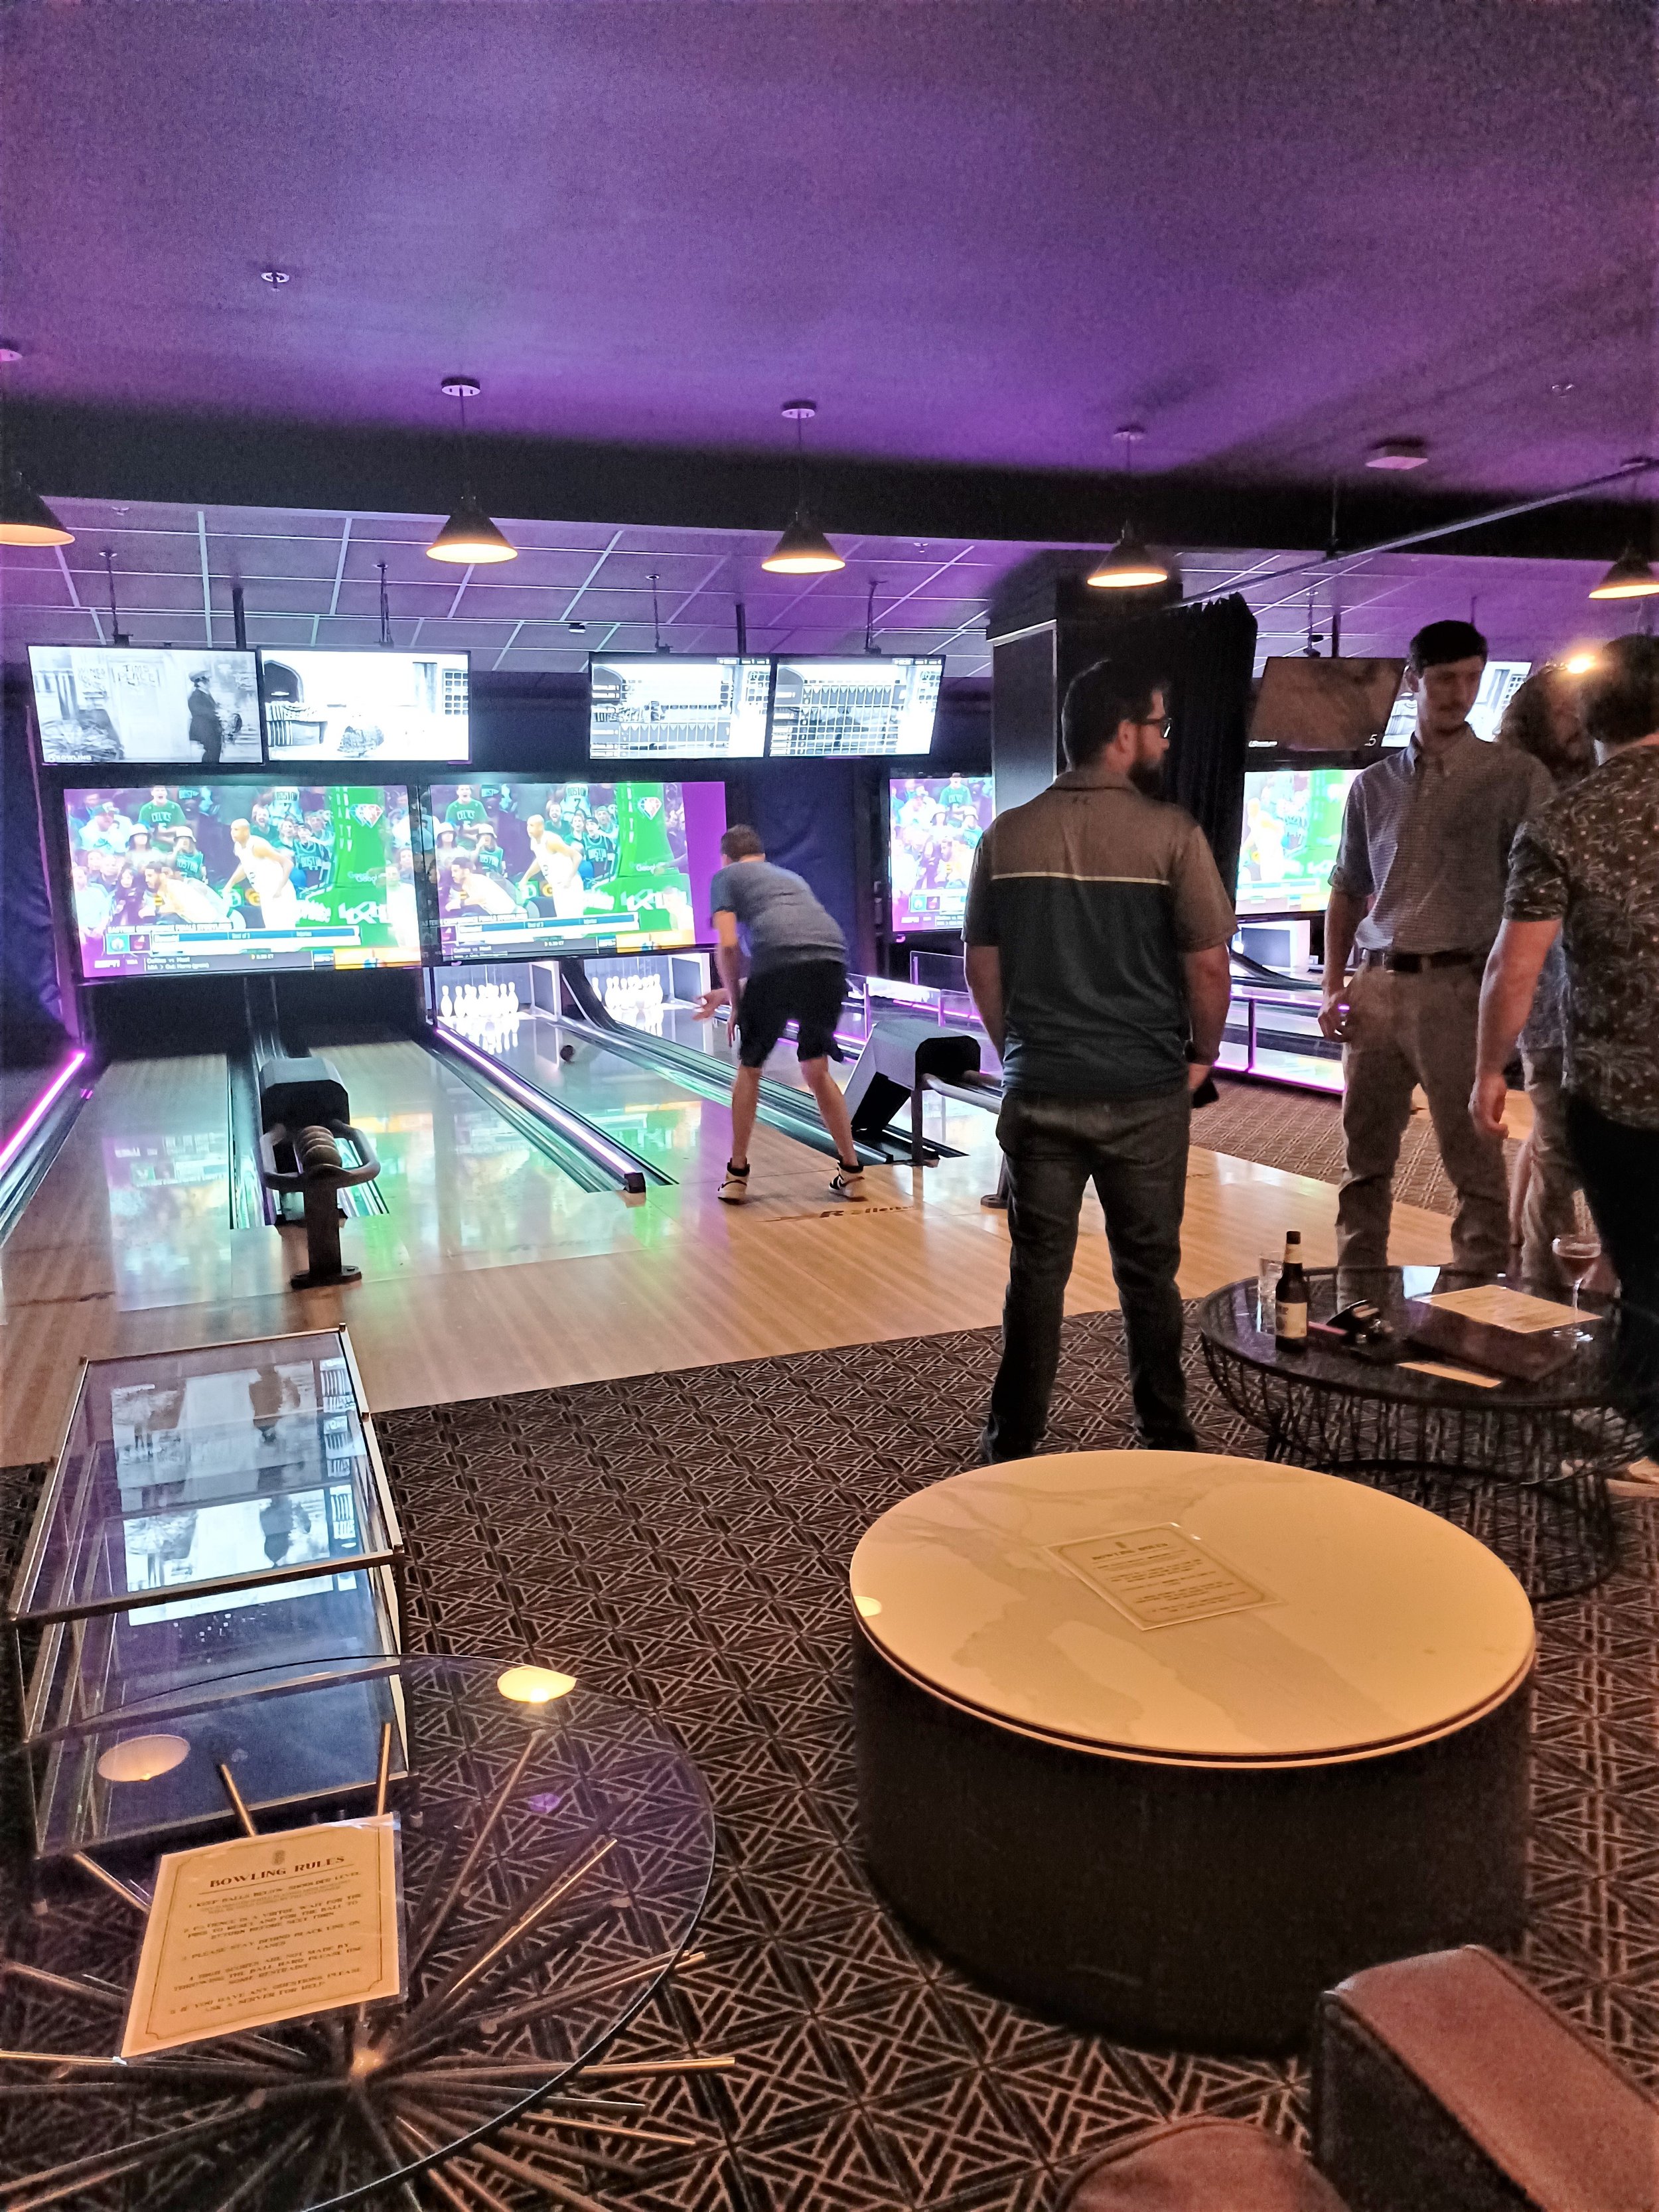 A little bowling action